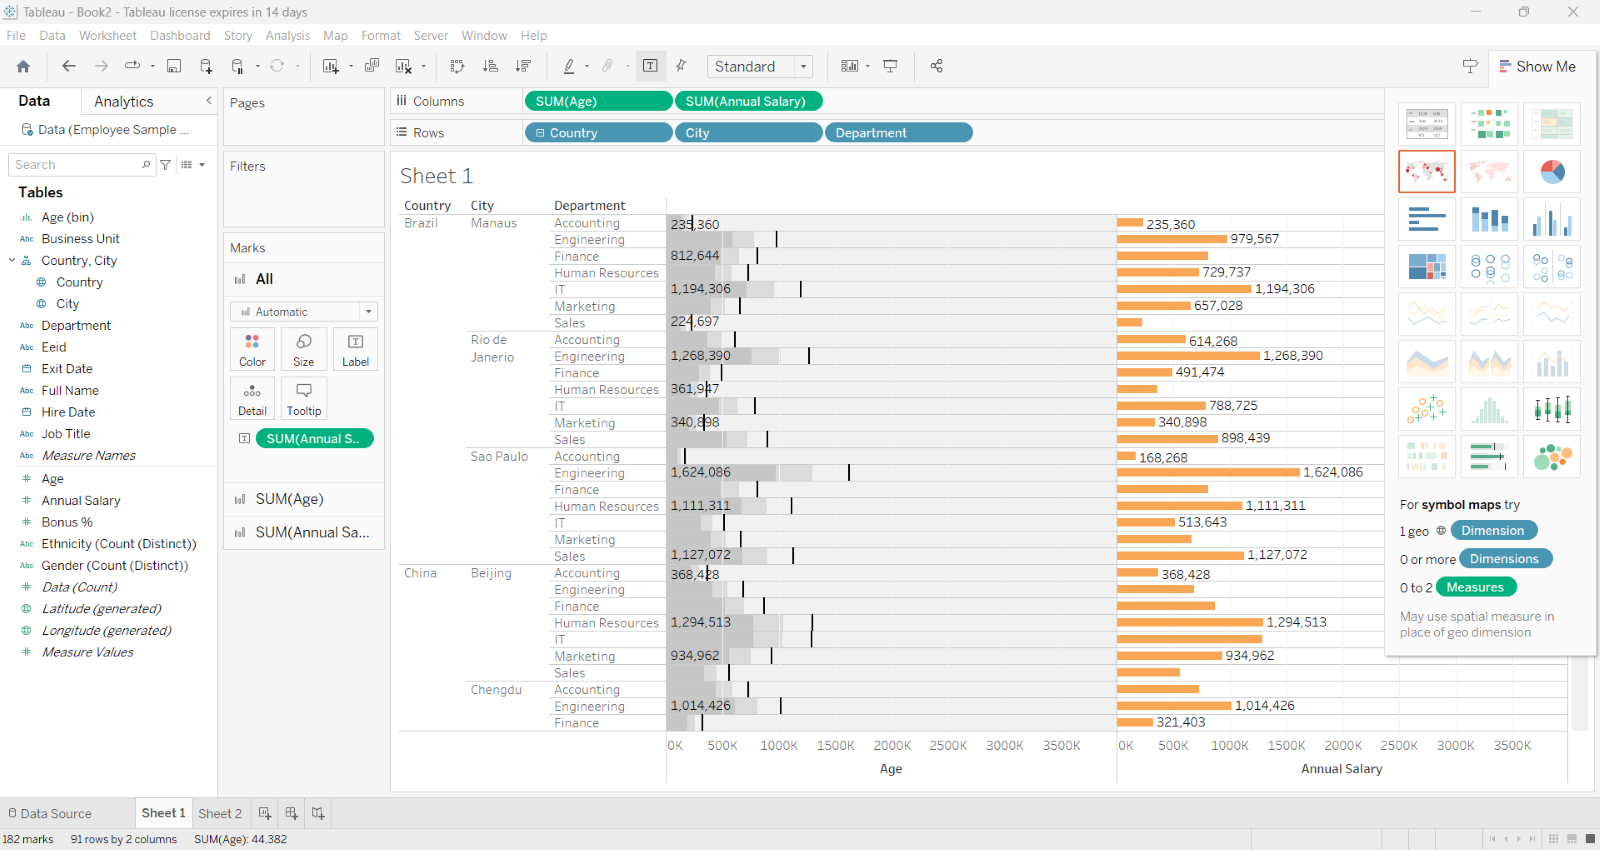 Bullets charts in Tableau